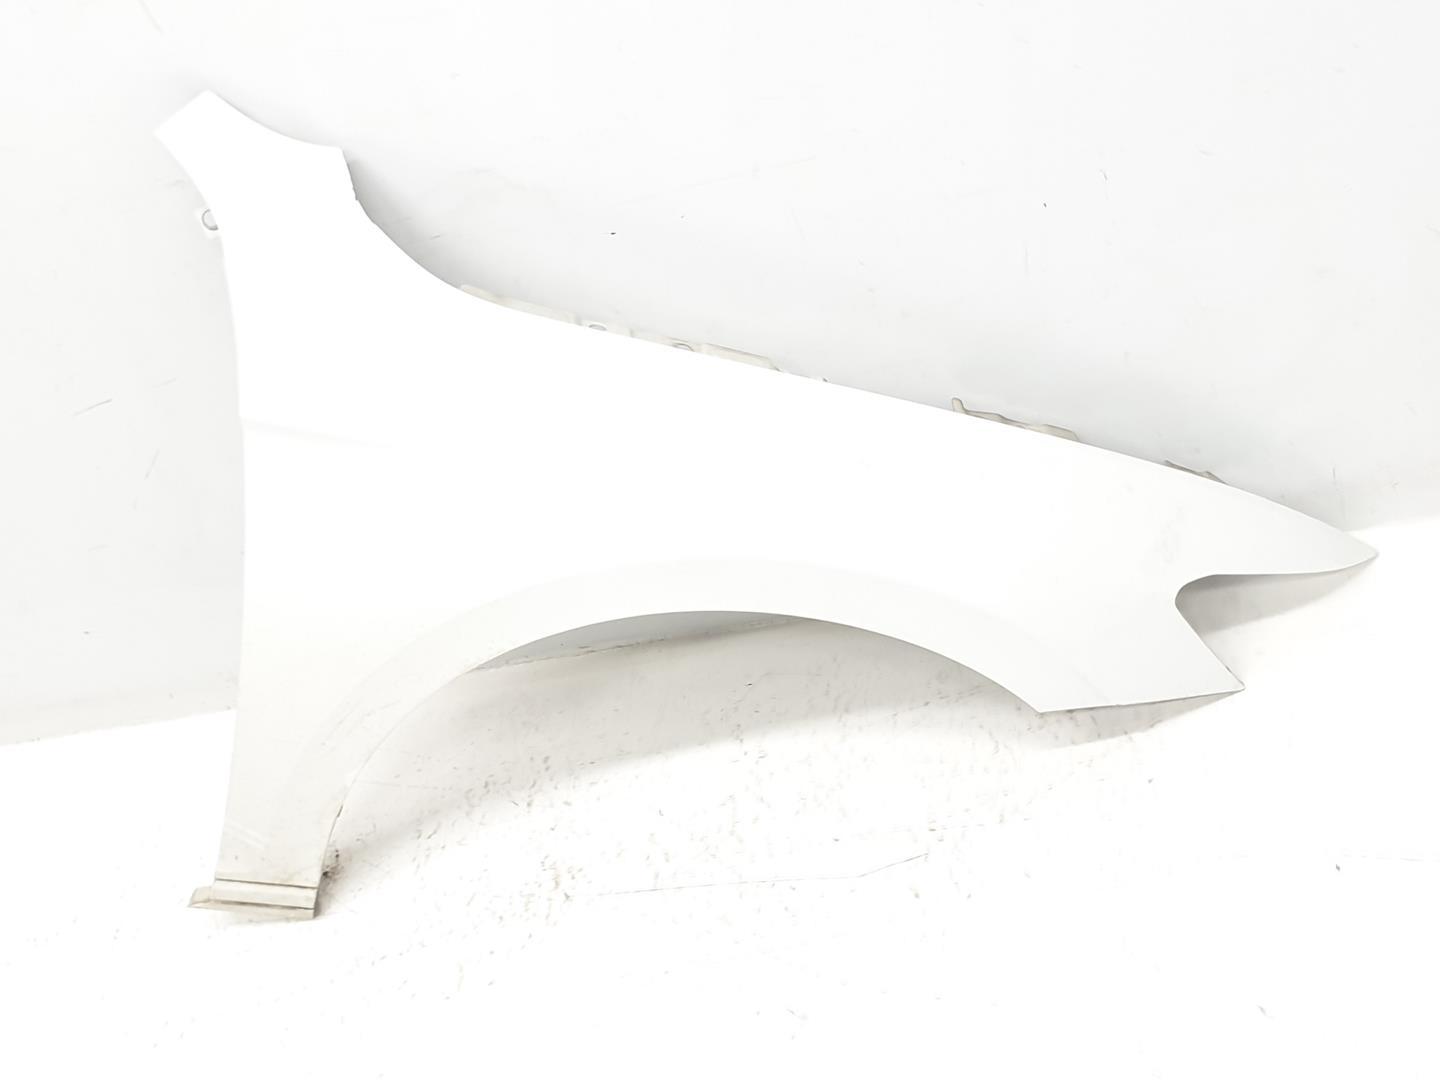 VOLKSWAGEN Passat B8 (2014-2023) Front Right Fender 3G0821022A, 3G0821022A, COLORBLANCO0Q 24884350